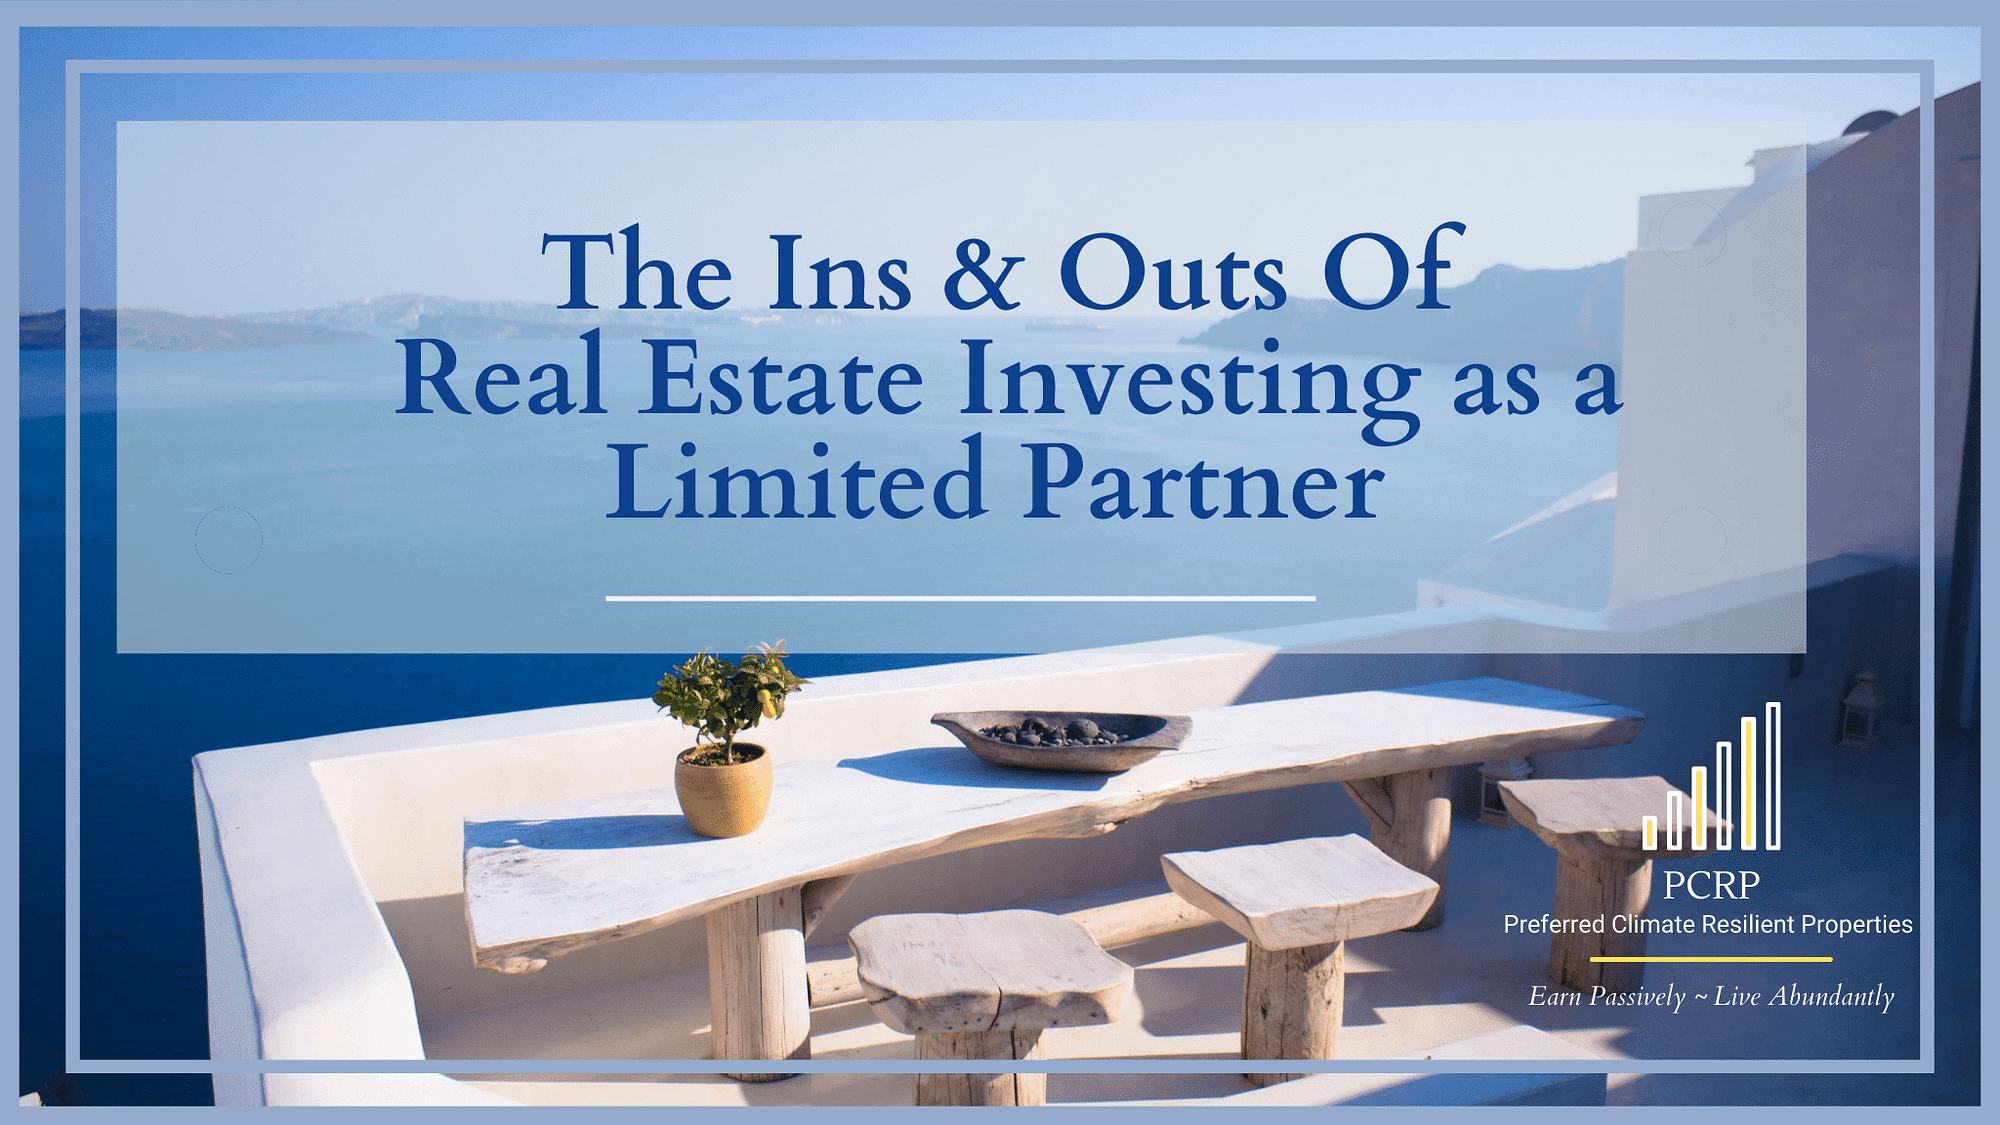 The Ins & Outs Of Real Estate Investing as a Limited Partner